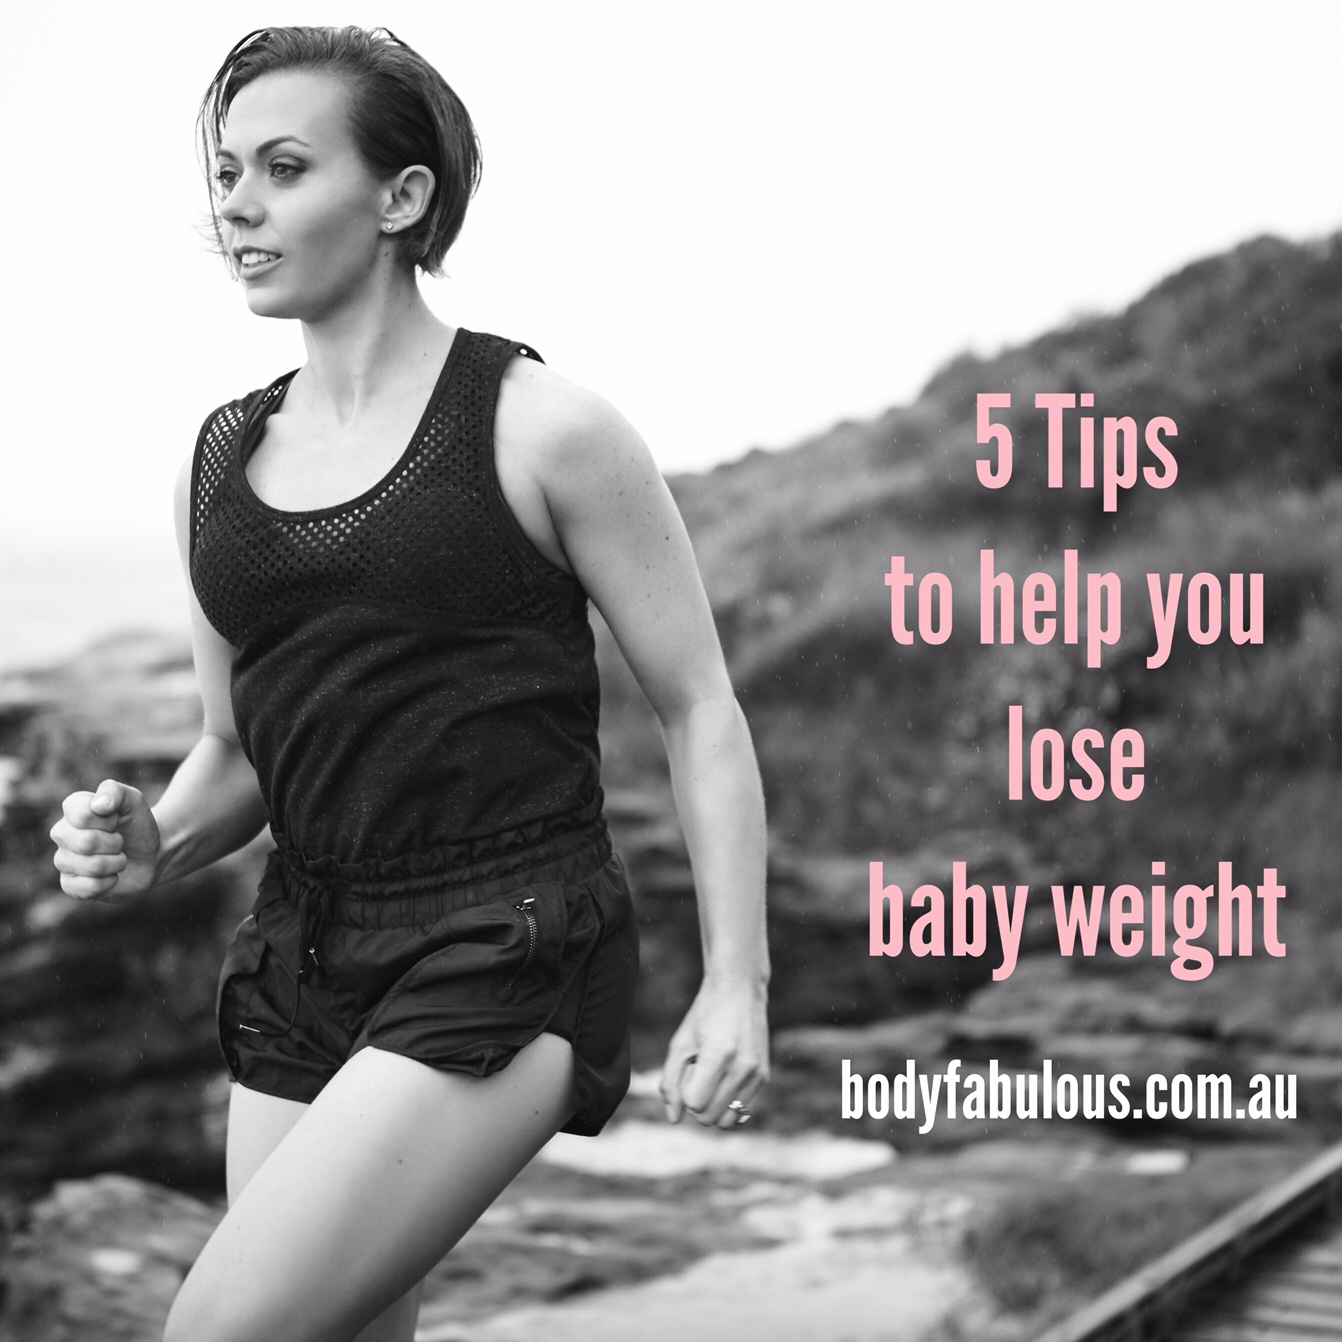 Lose baby weight - effectively.